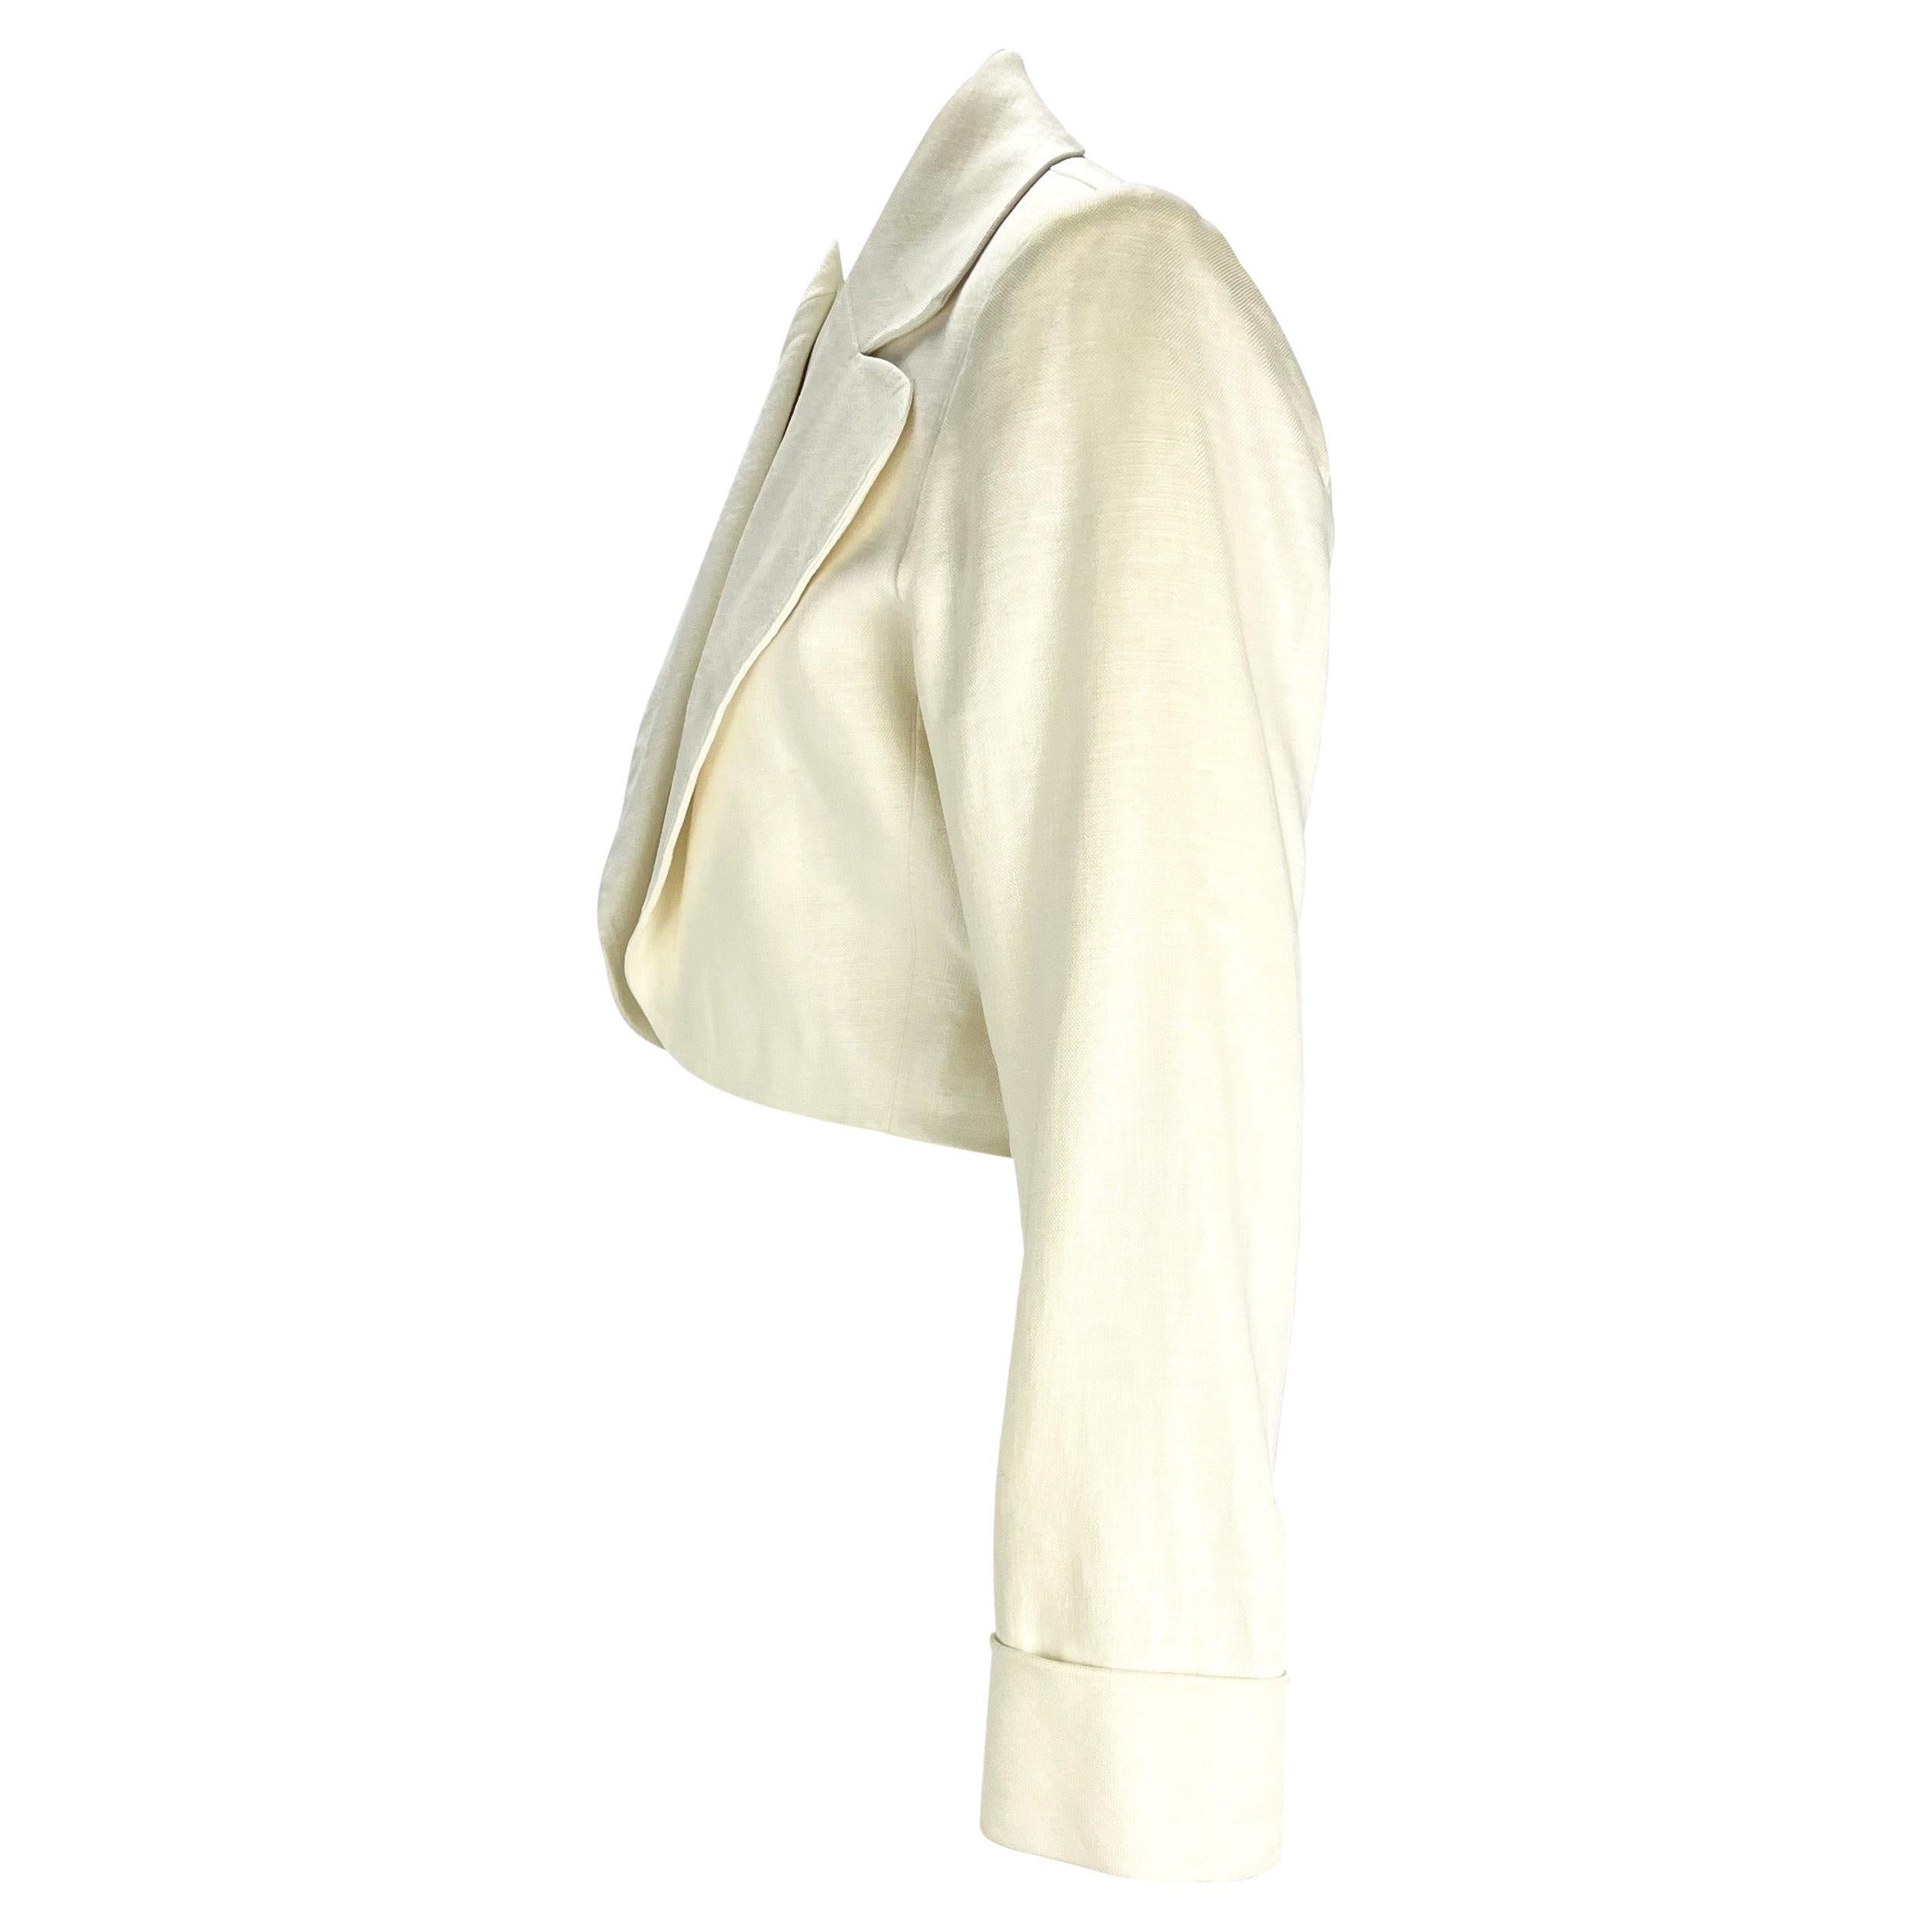 S/S 1986 Saint Laurent Rive Gauche Cropped White Linen Flax Open Blazer In Good Condition For Sale In West Hollywood, CA